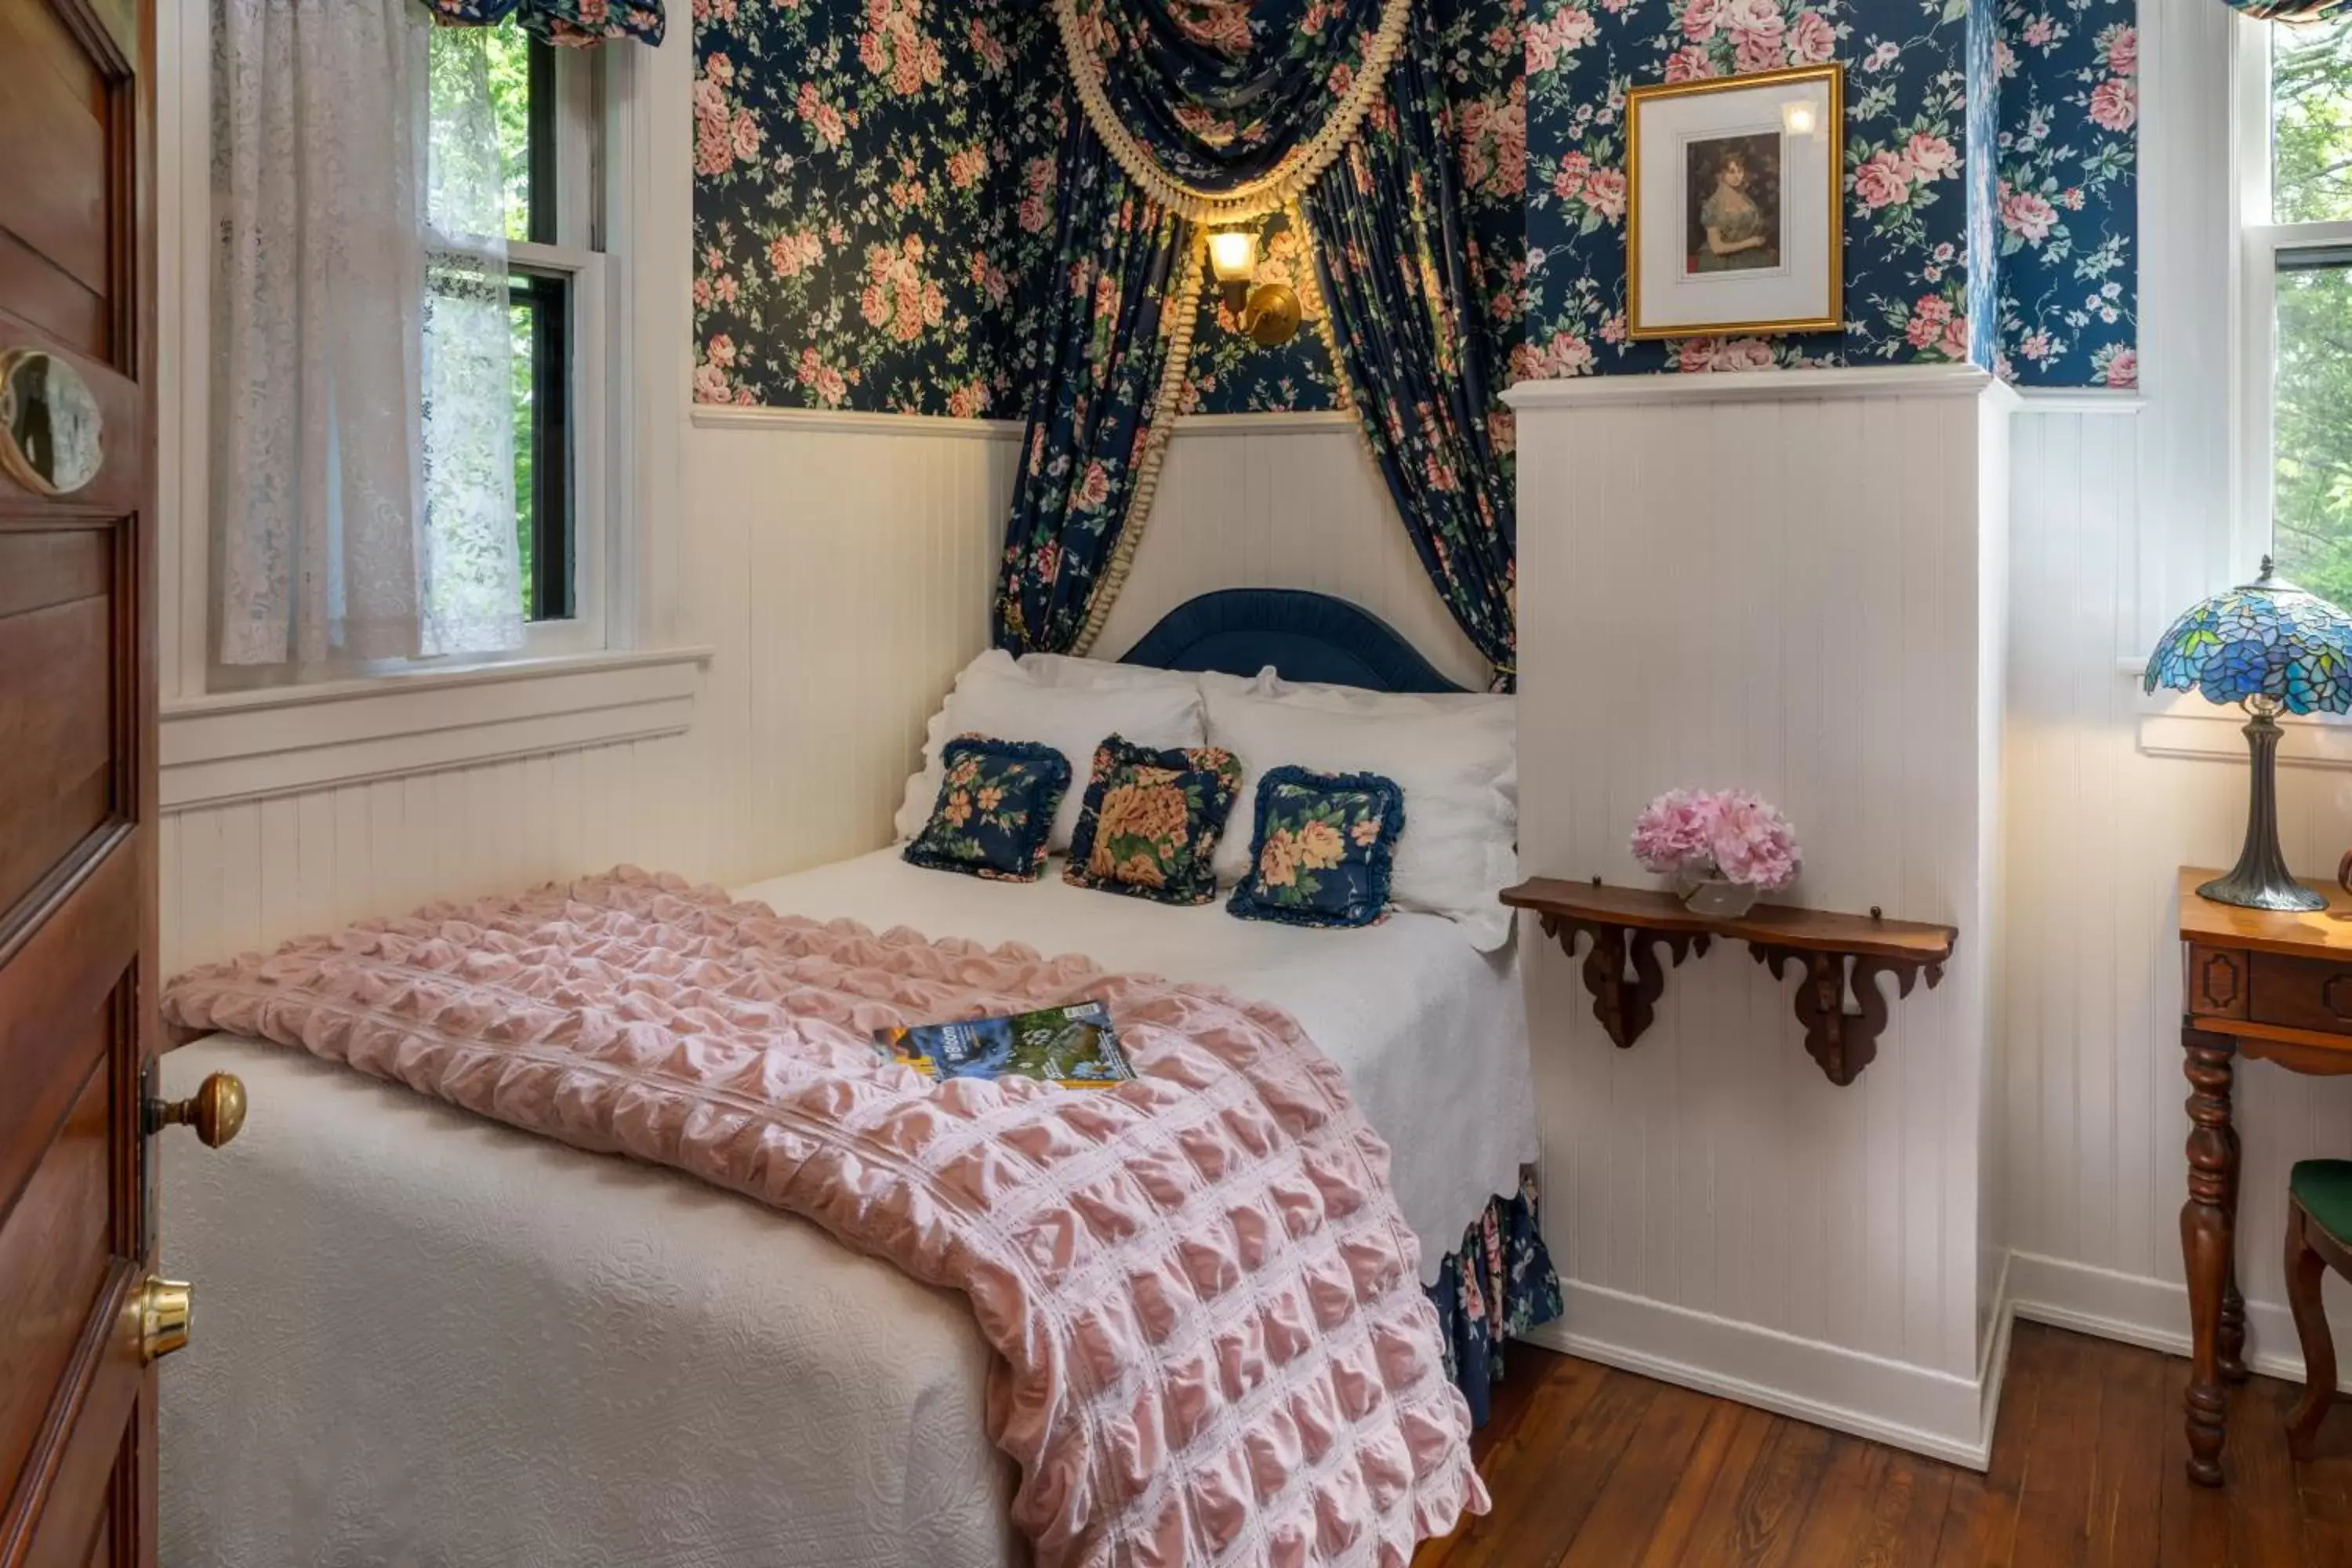 Bed in The 1899 Wright Inn & Carriage House